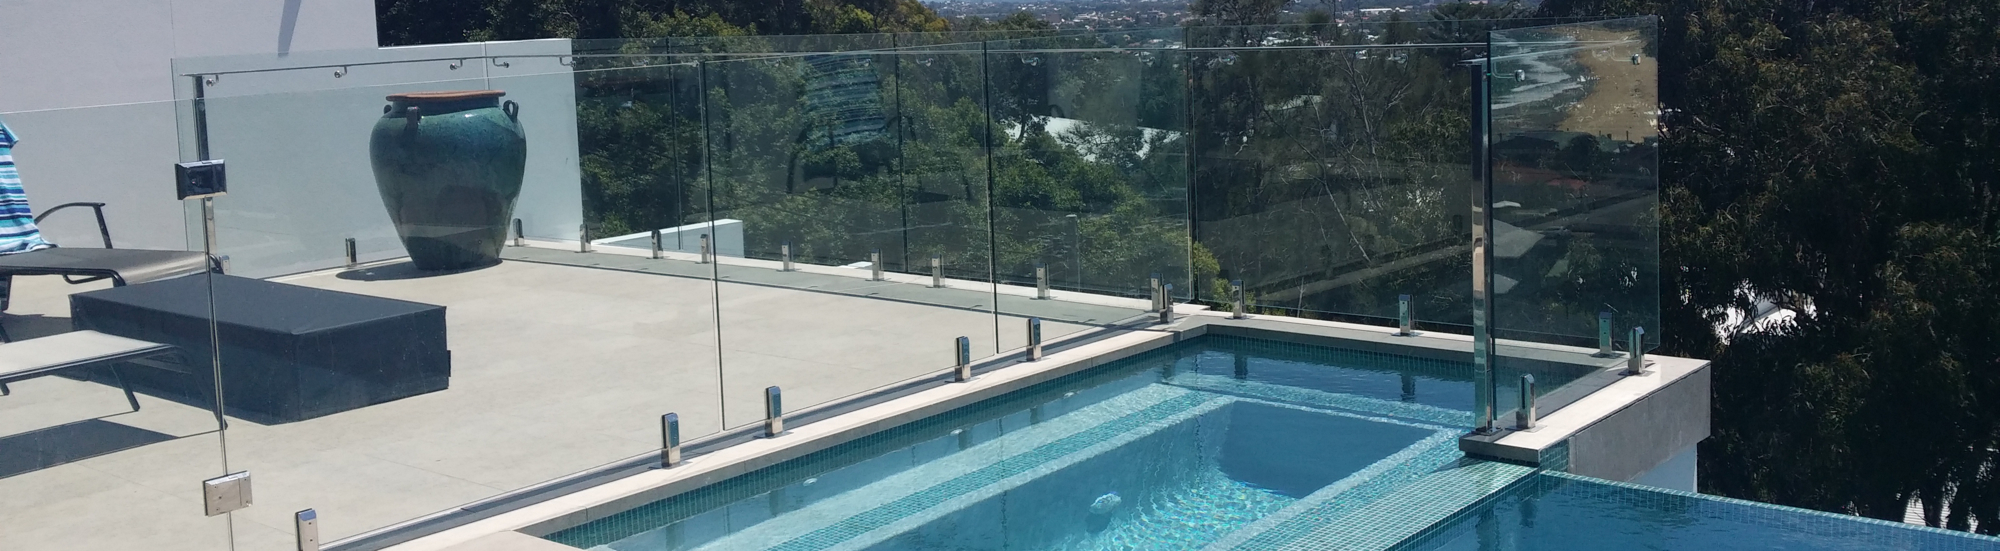 glass-fence-plunge-pool